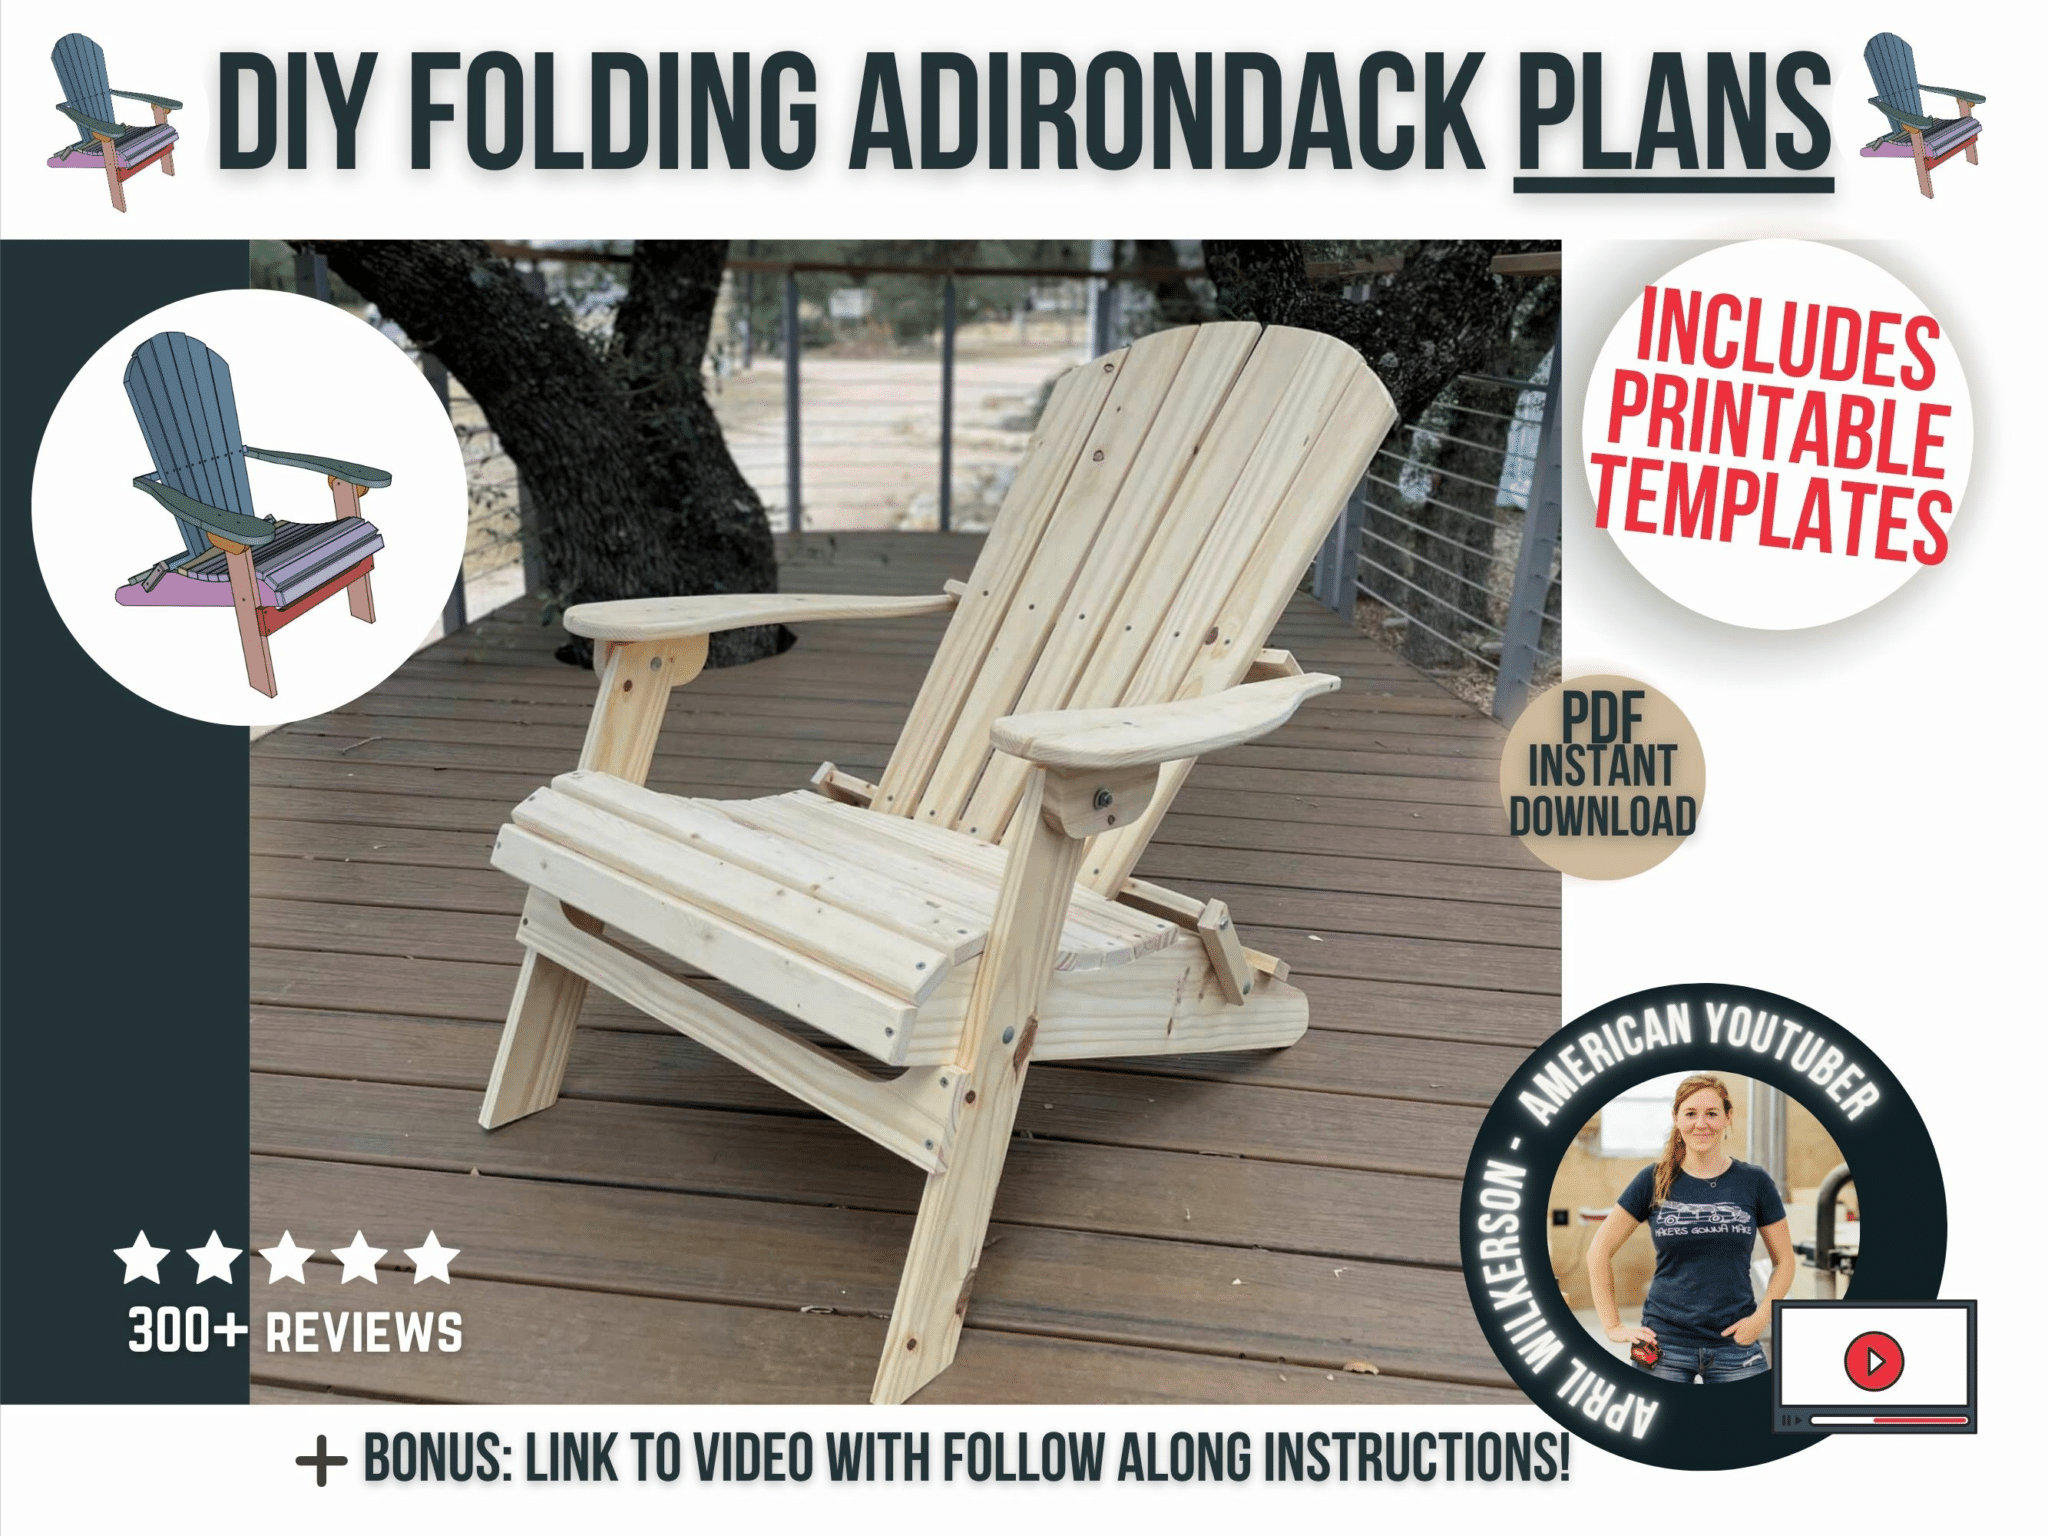 https://wilkerdos.com/wp-content/uploads/2020/06/Folding-Adirondack-Chair-Arrows-scaled.png